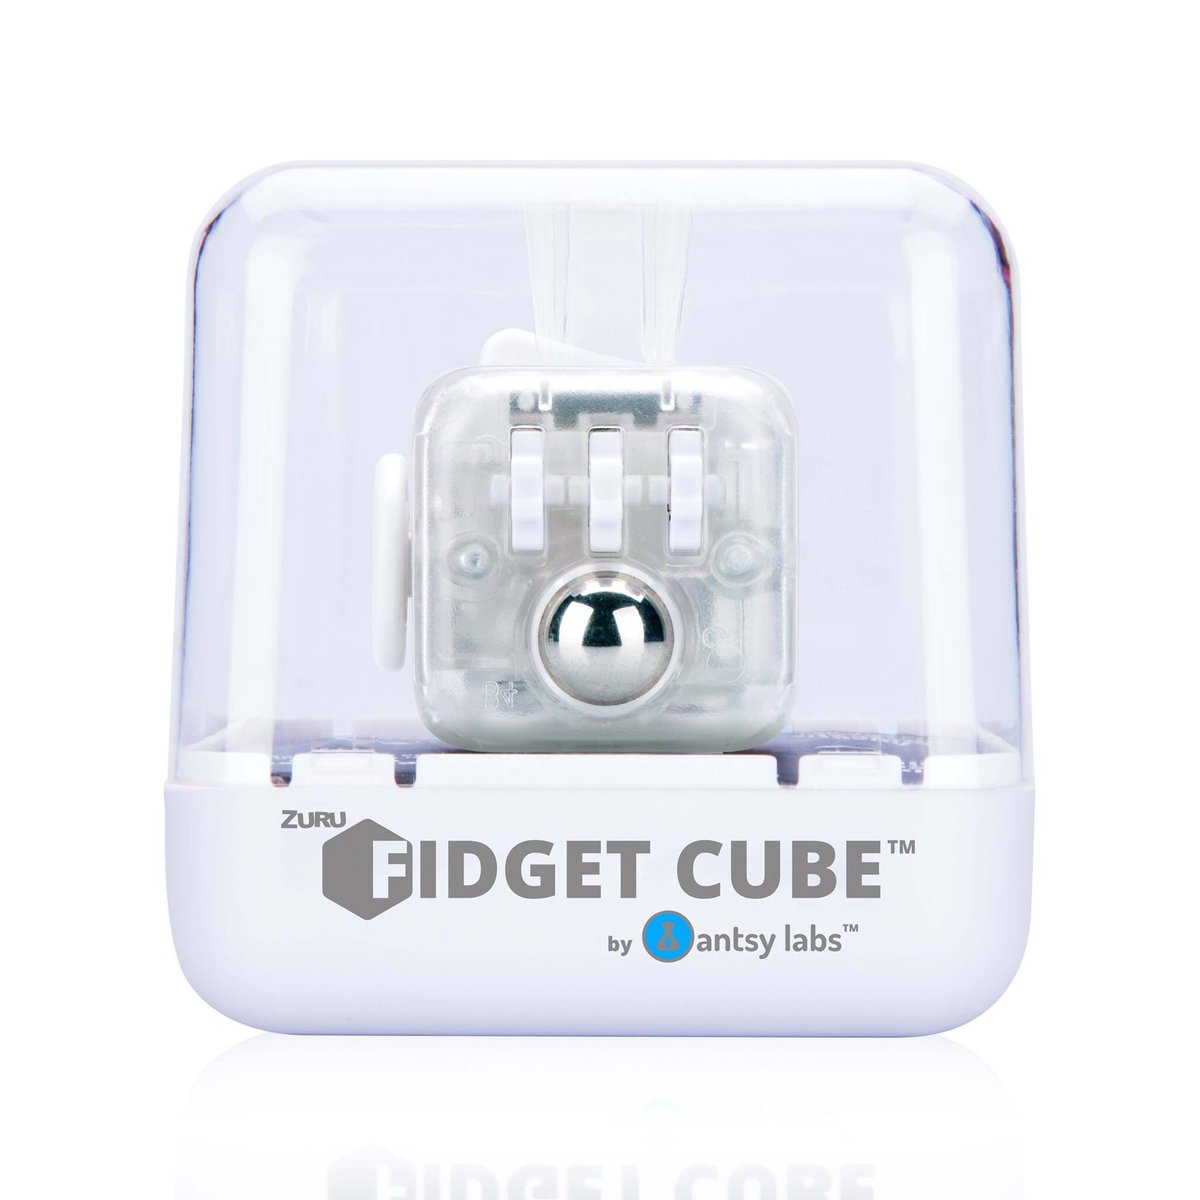 Antsy Labs Introducing The New Translucent Fidget Cube Check Out The Whole Line Up Of Our New Custom Series Fidget Cubes At T Co Tayrpmrdjd Antsylabs Fidgetcube Fidgeton Fidgetfever Fidget T Co Duaxrx4vzq